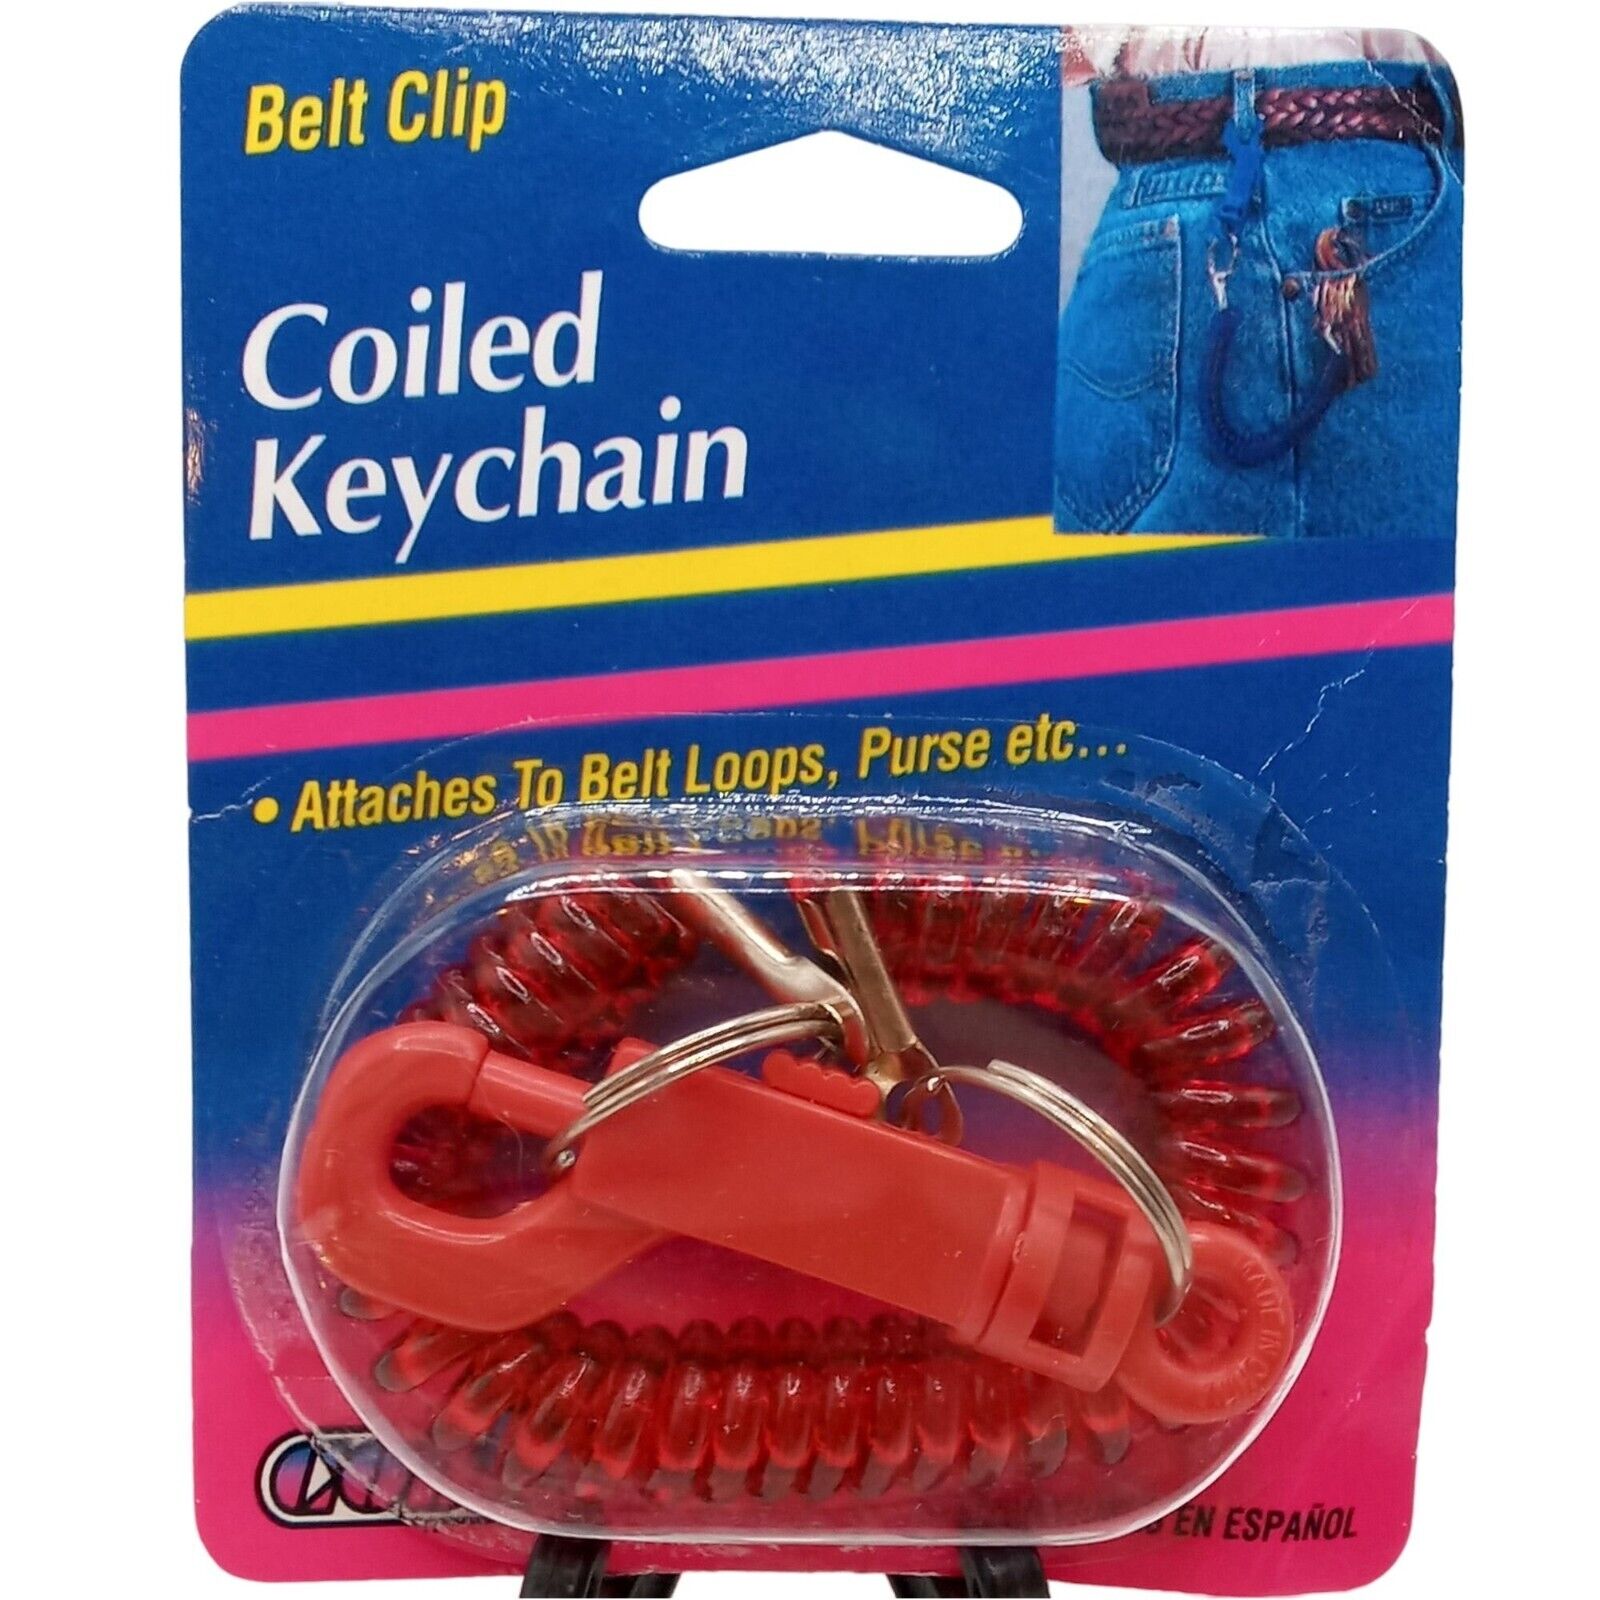 Vintage Coiled Keychain 1995 NOS Cobbs Original Packaging Clip Key Ring New In B